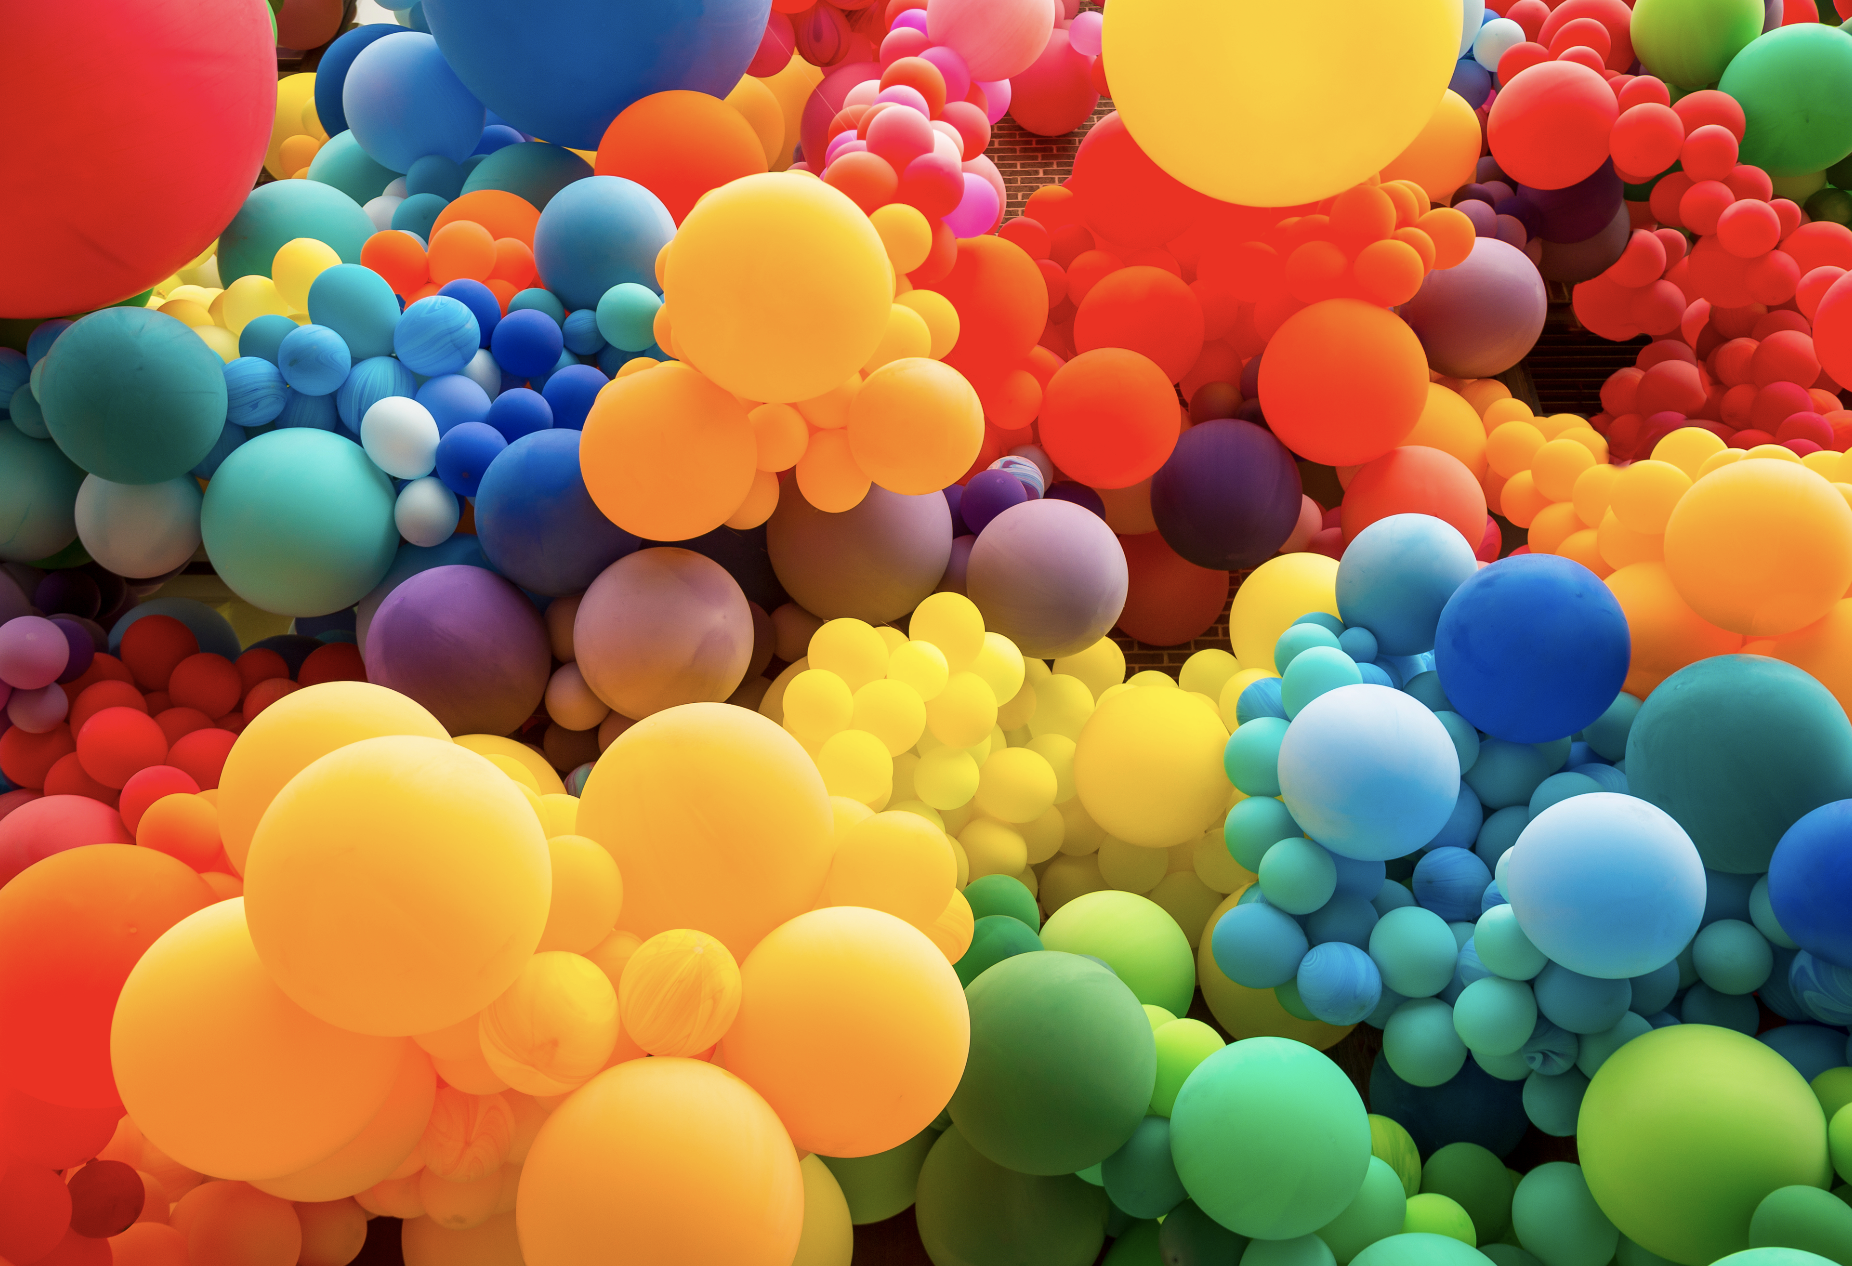 Play with over 600,000 balloons at this new immersive experience coming to NYC